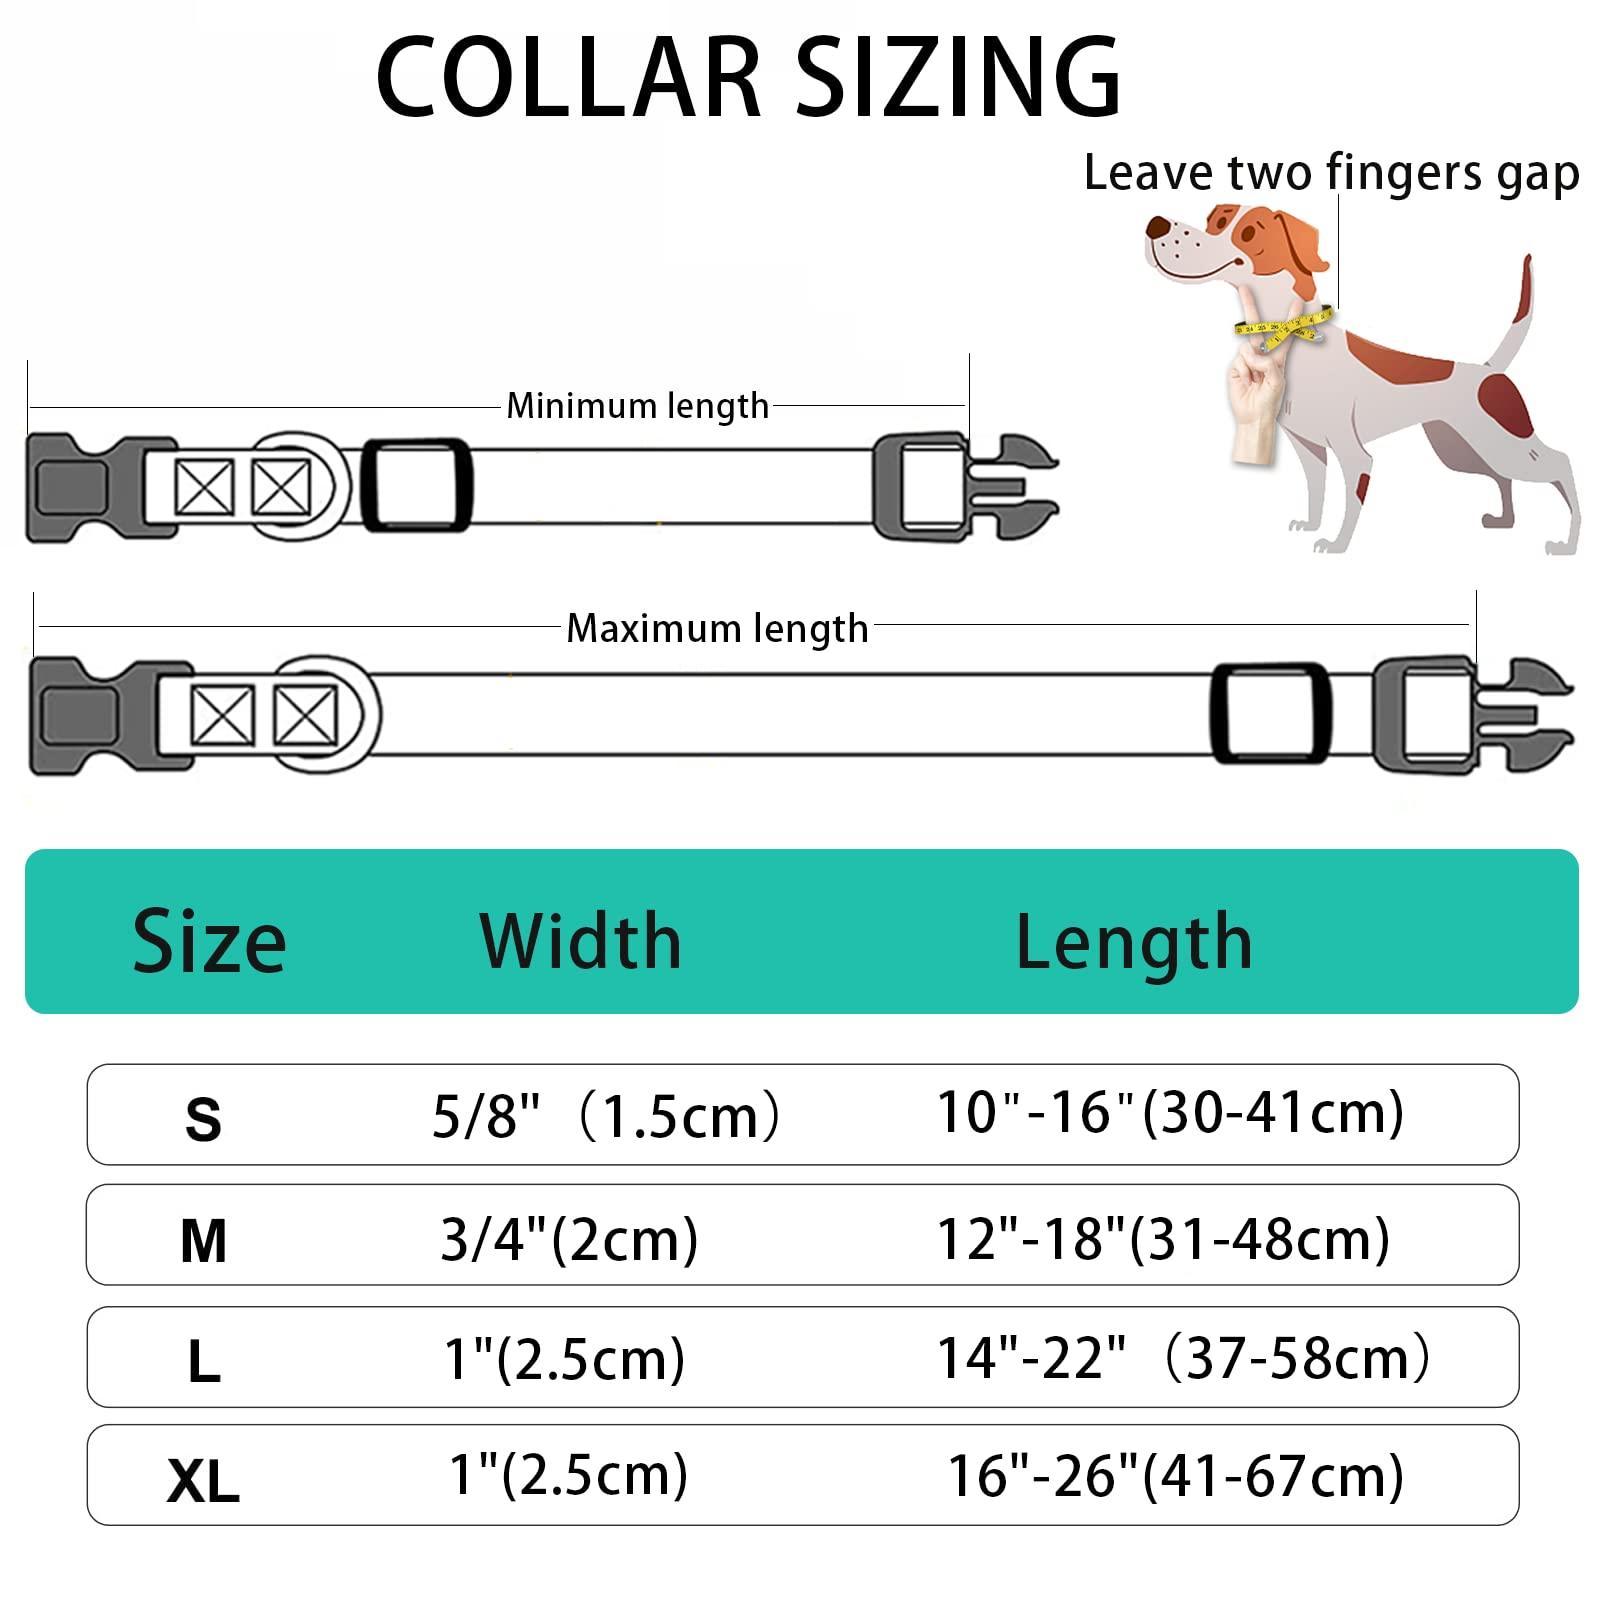 Soft Padded Personalized Dog Collar - Reflective Engraved Quick Release Custom Pet Collar - iTalkPet